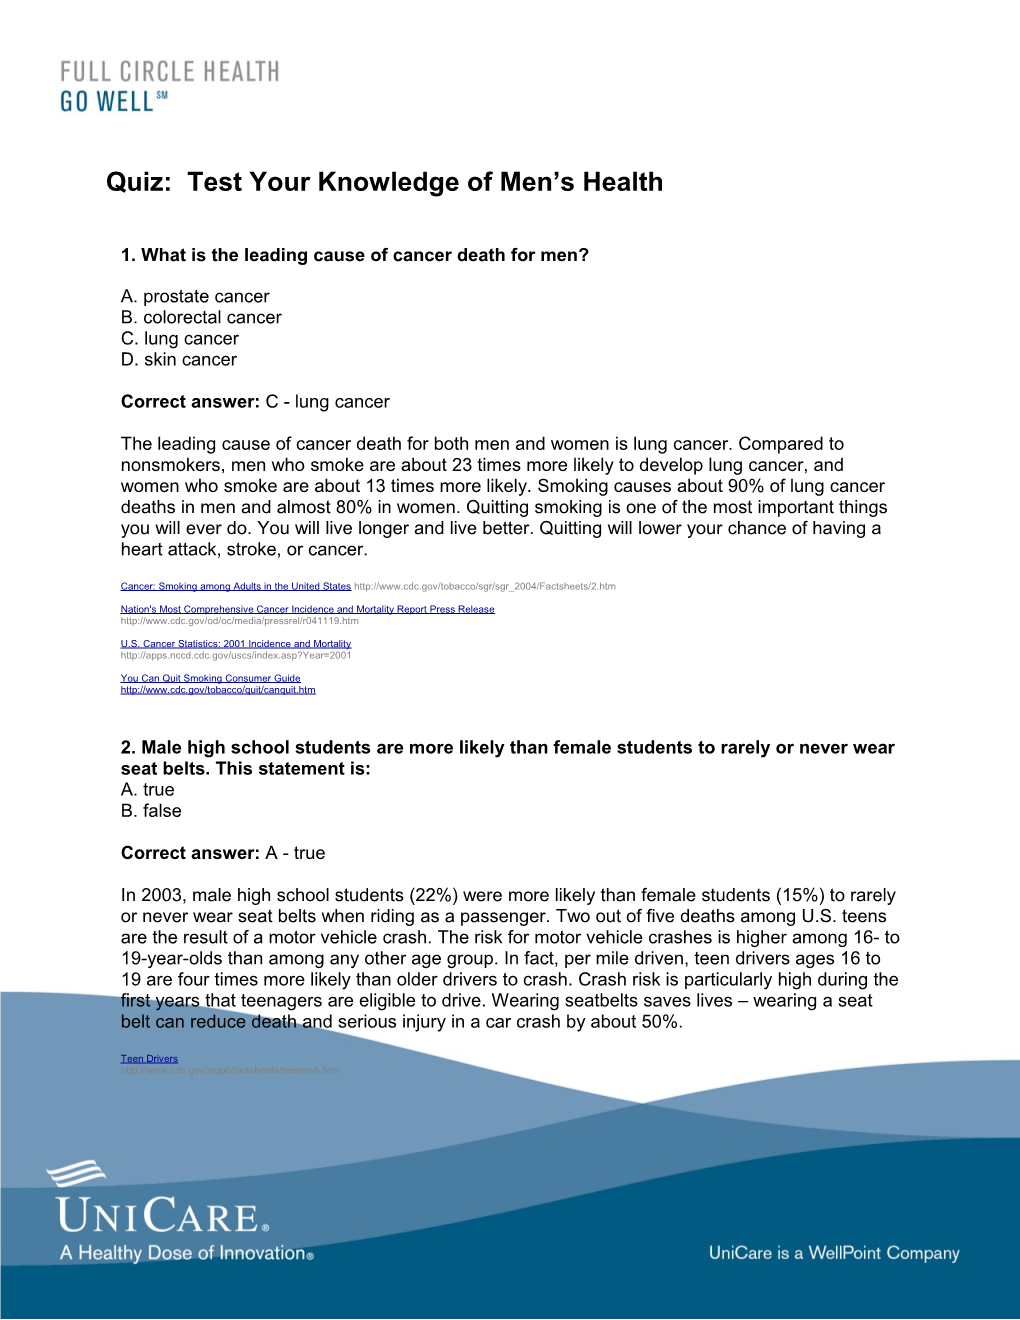 Questions and Answers: Test Your Knowledge About Men's Health